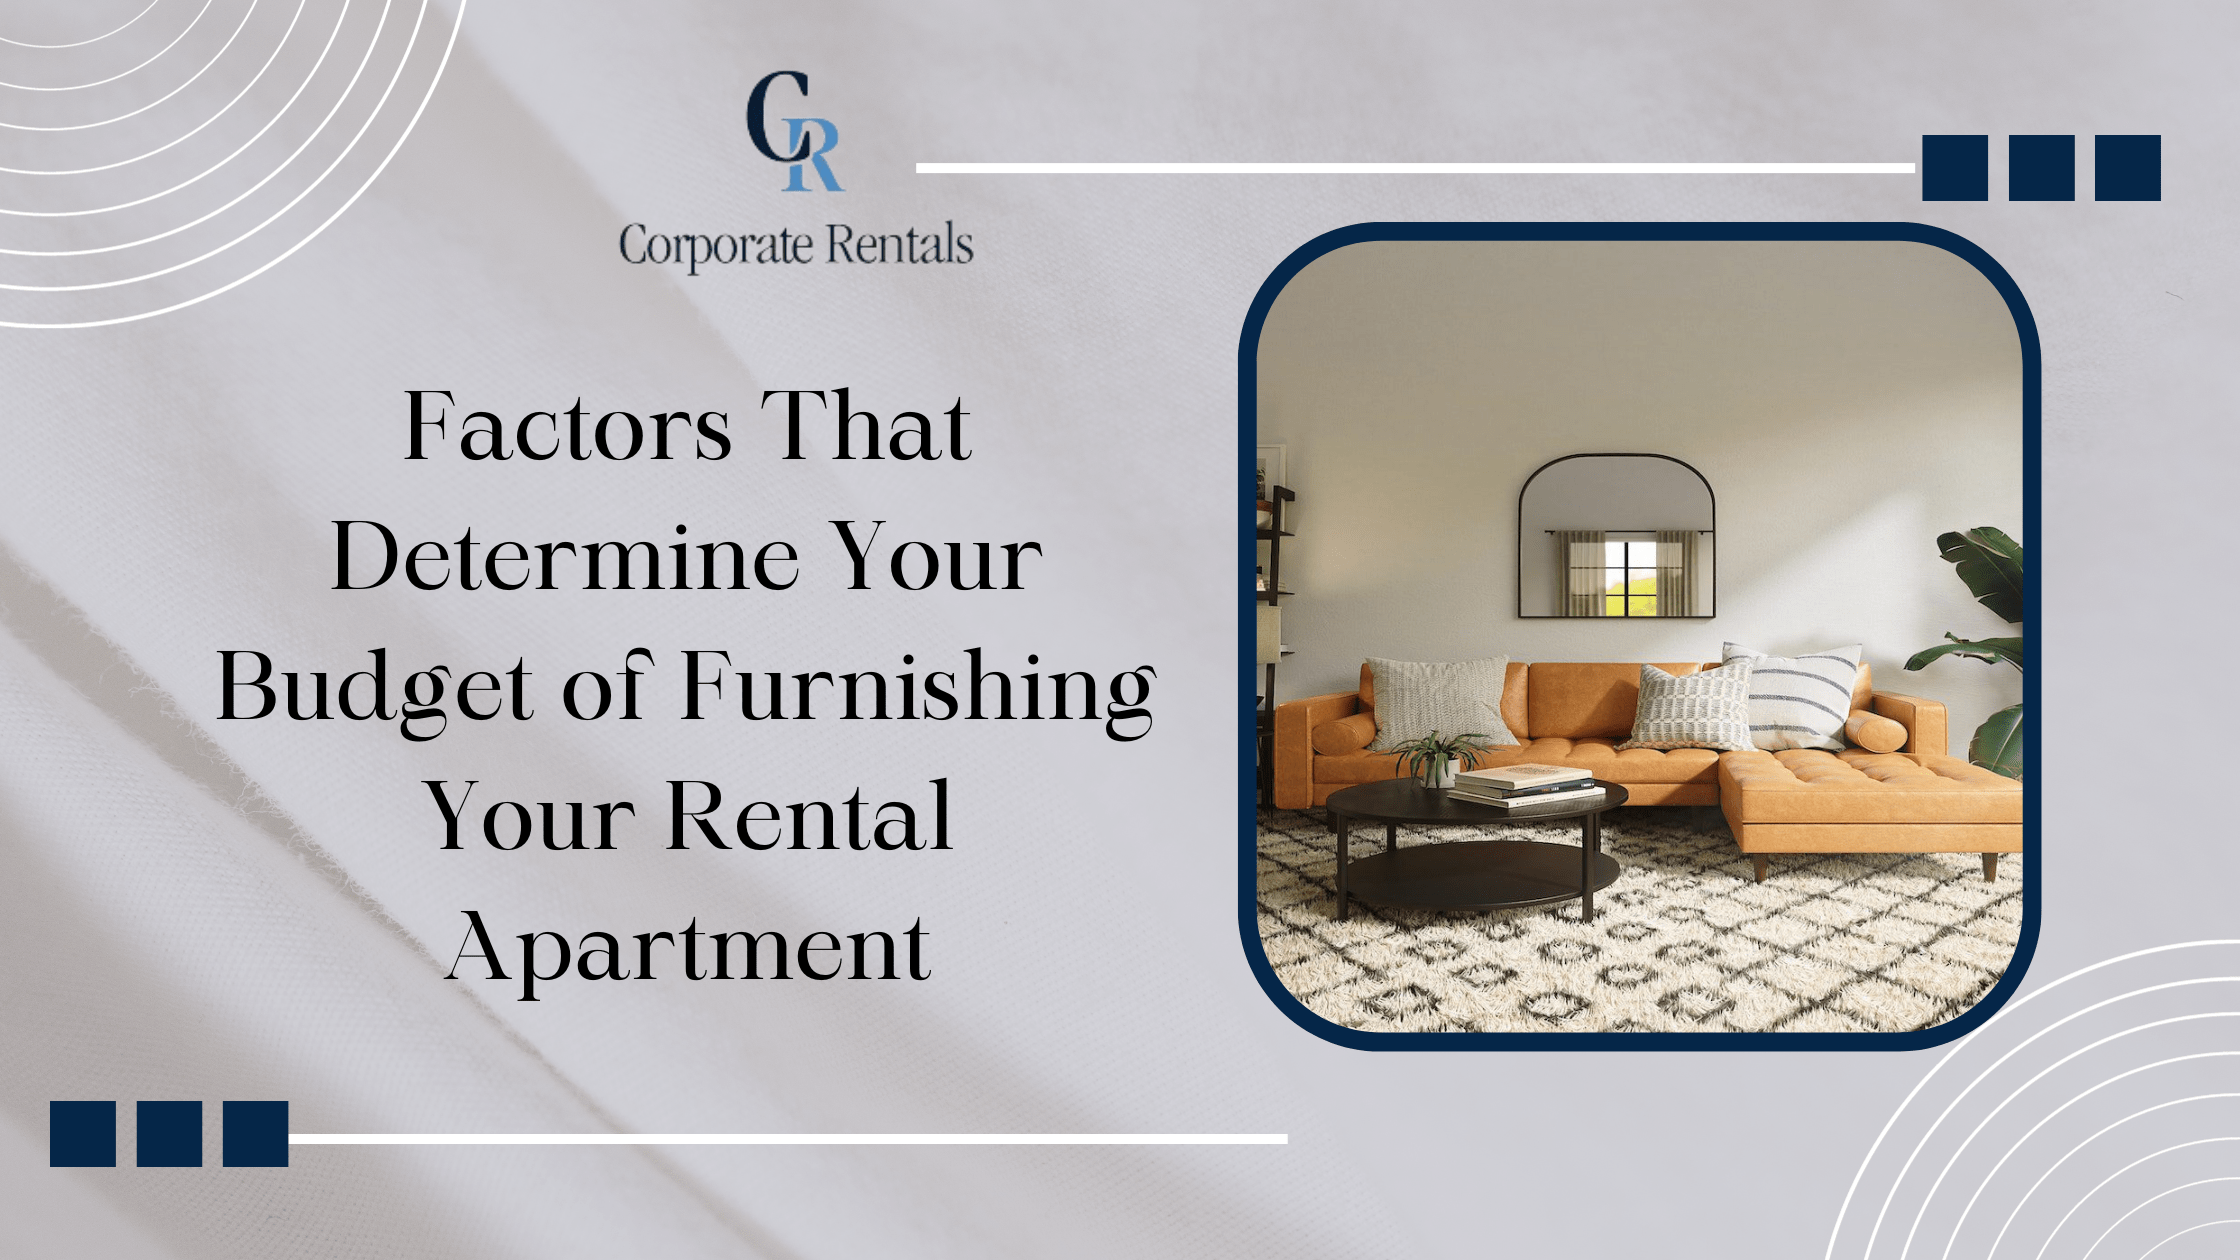 Factors That Determine Your Budget of Furnishing Your Rental Apartment